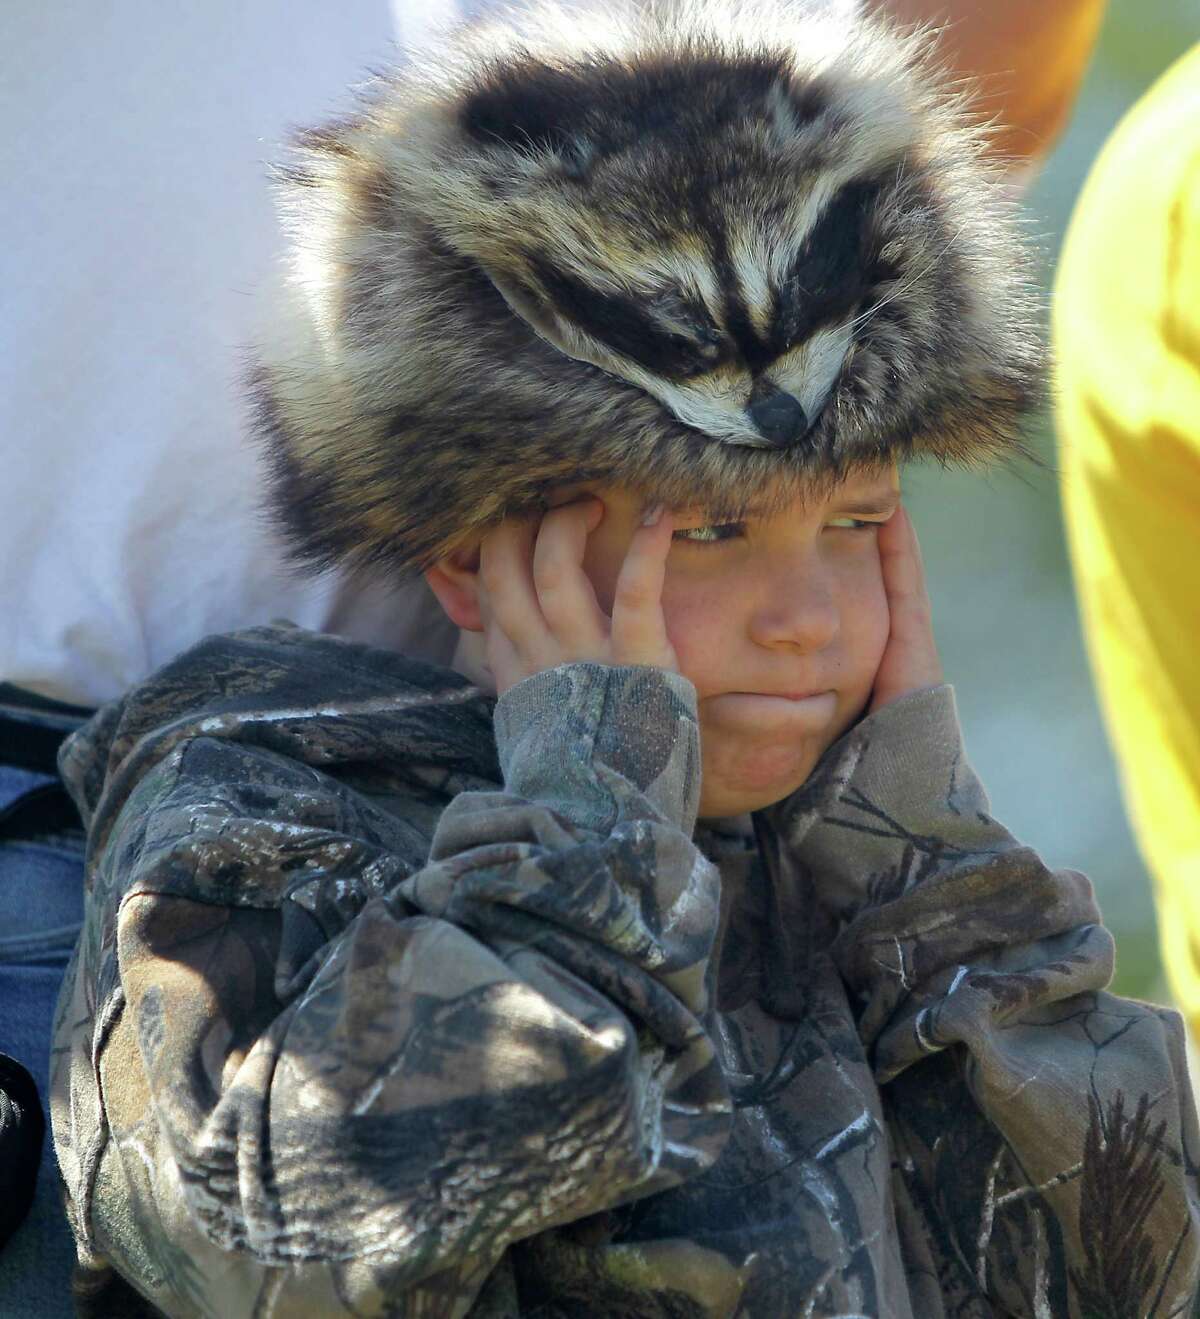 Wade Moore, 7, of Deer Park, covers his ears wearing a coon-skin cap as a cannon is fired during festivities commemorating the 176th anniversary of the battle of San Jacinto at the San Jacinto Battleground, Saturday, April 21, 2012, in Houston.